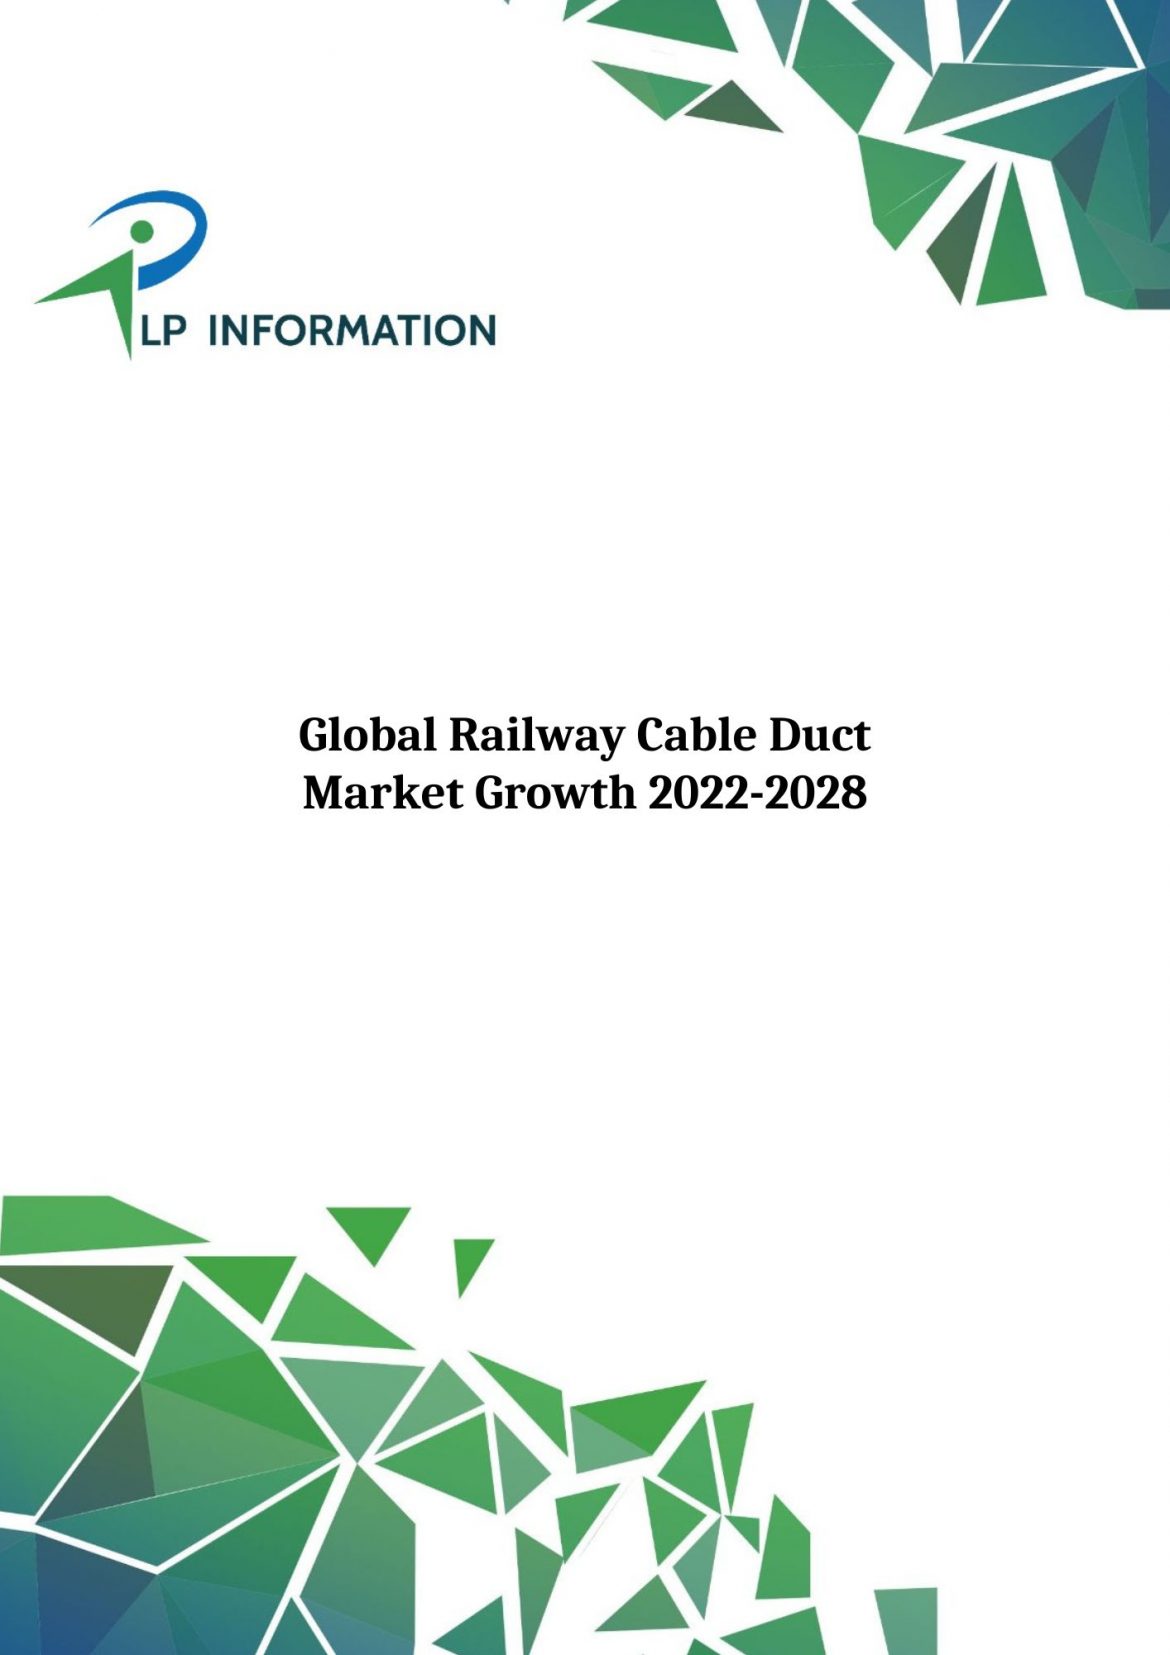 Global Railway Cable Duct Market Growth 2022-2028